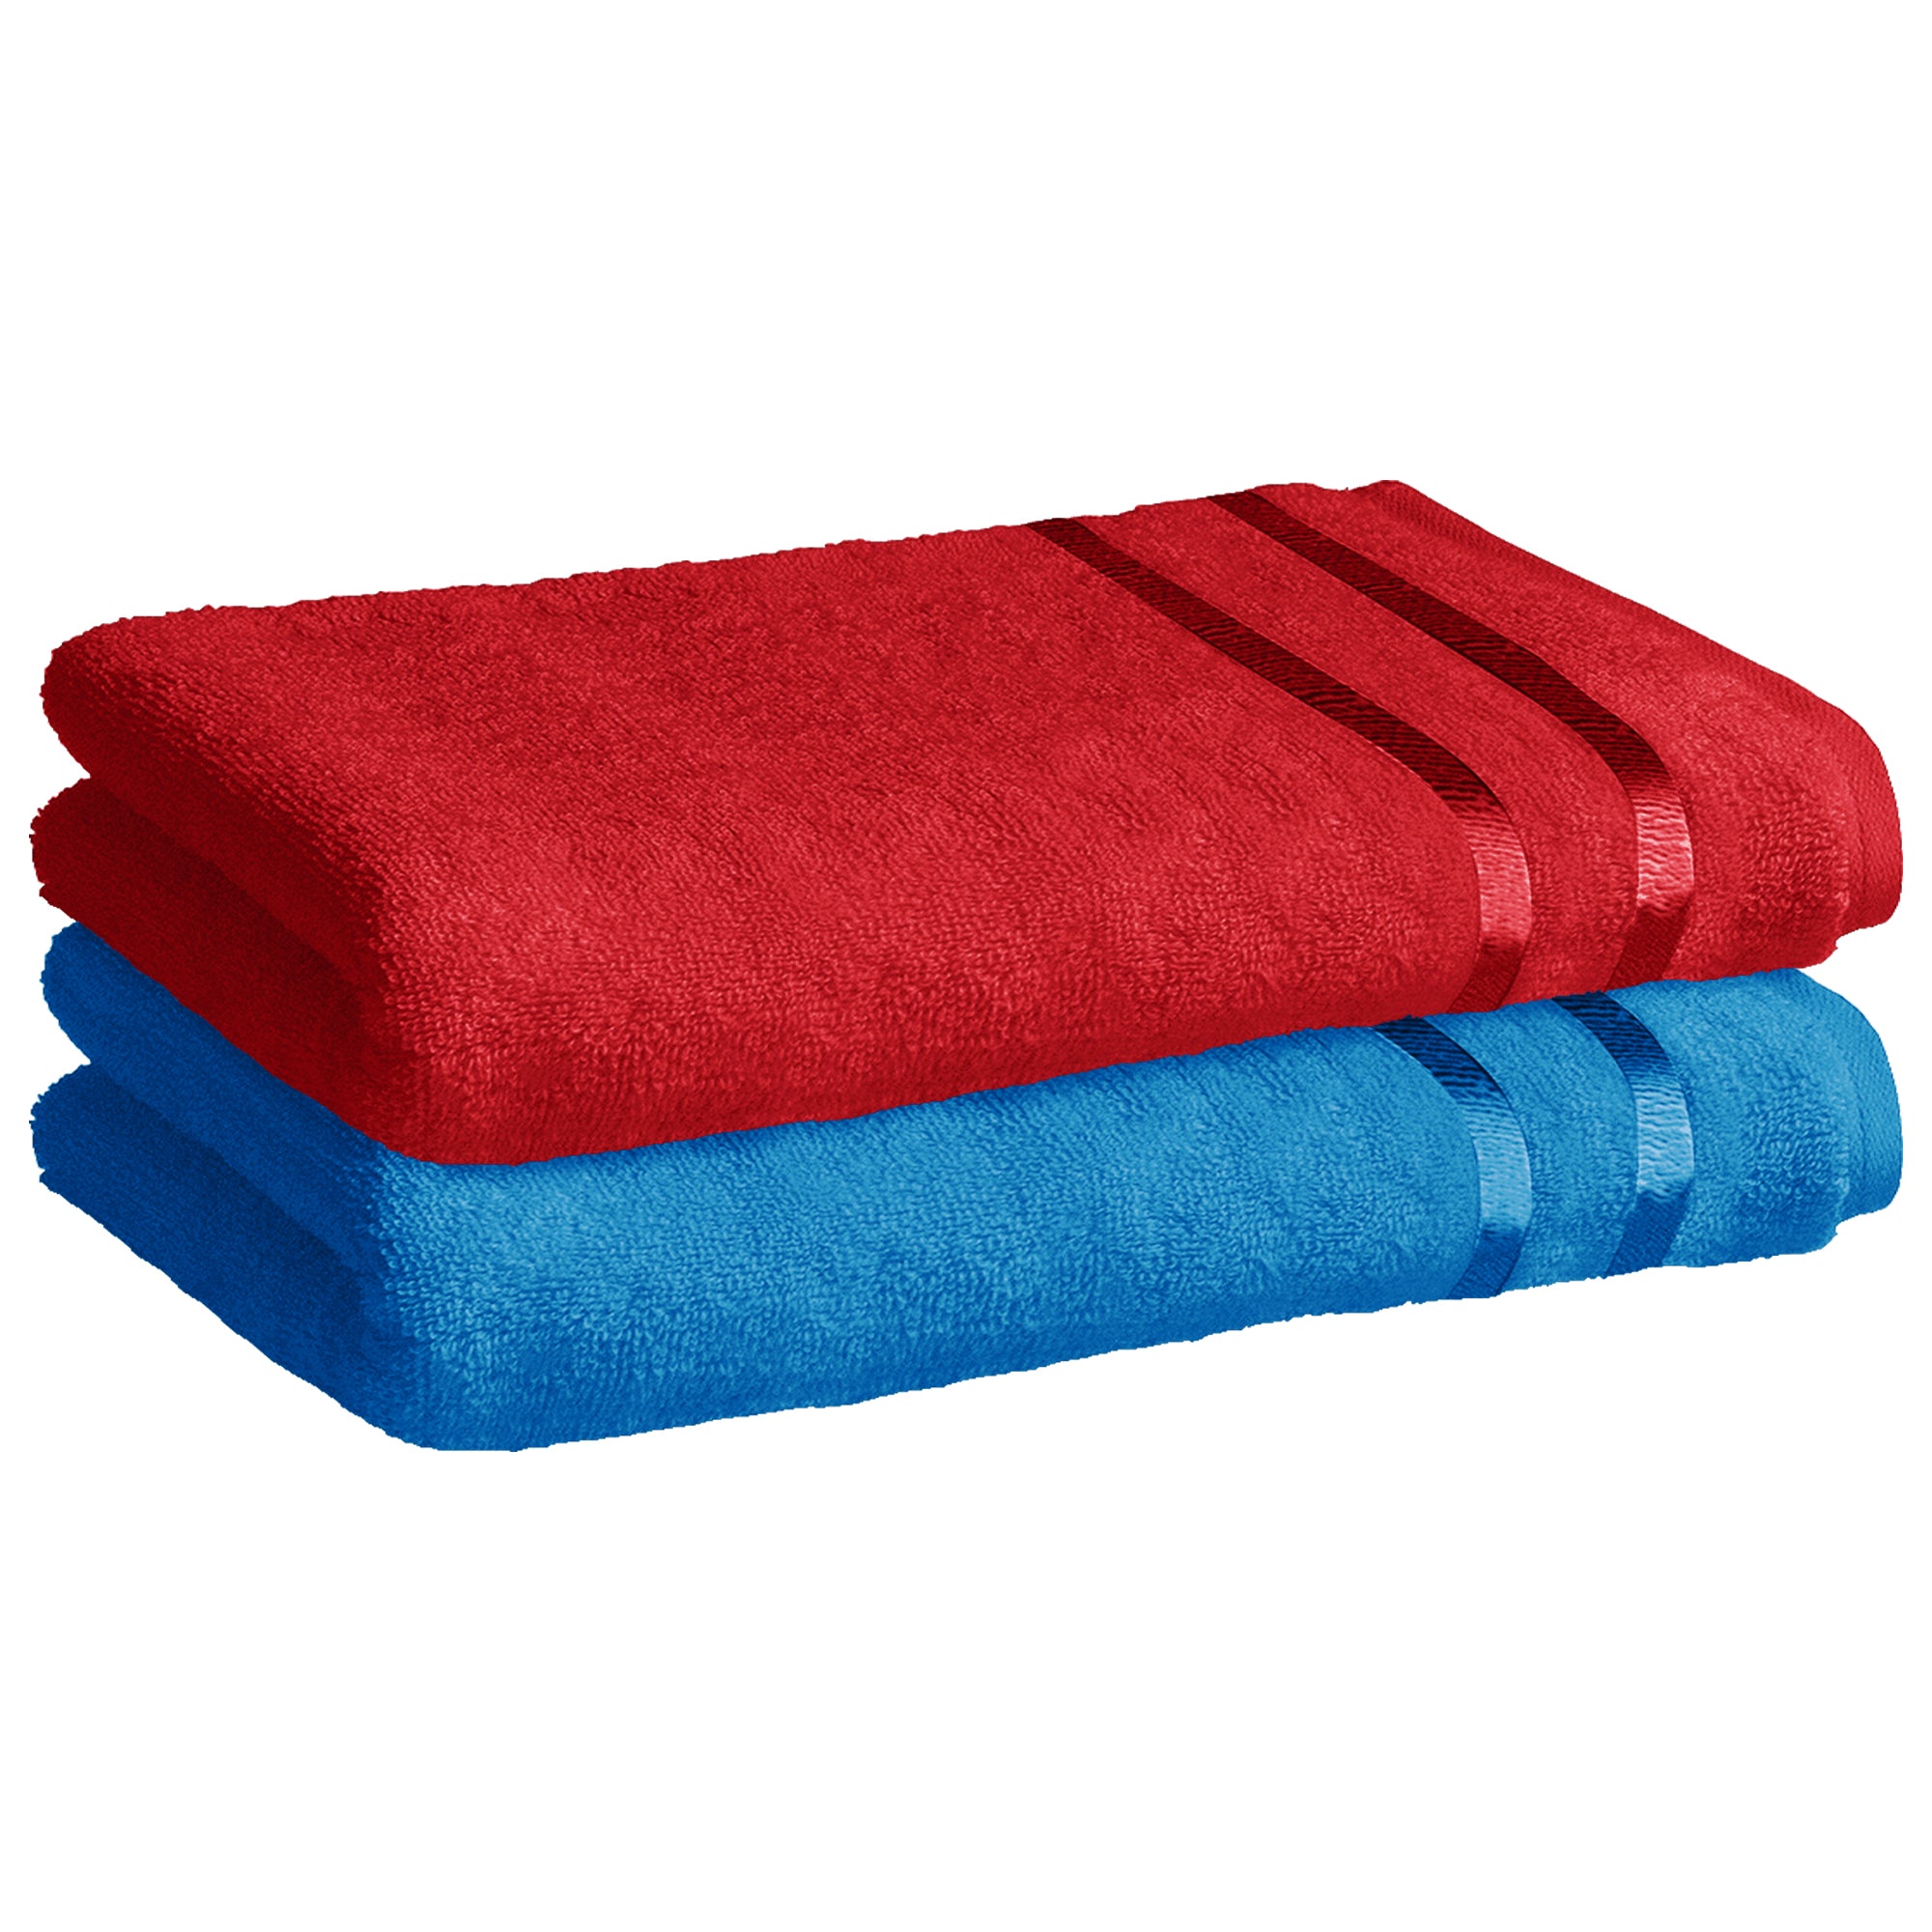 Story@Home 2 Units 100% Cotton Ladies Bath Towels - Blue and Wine Red